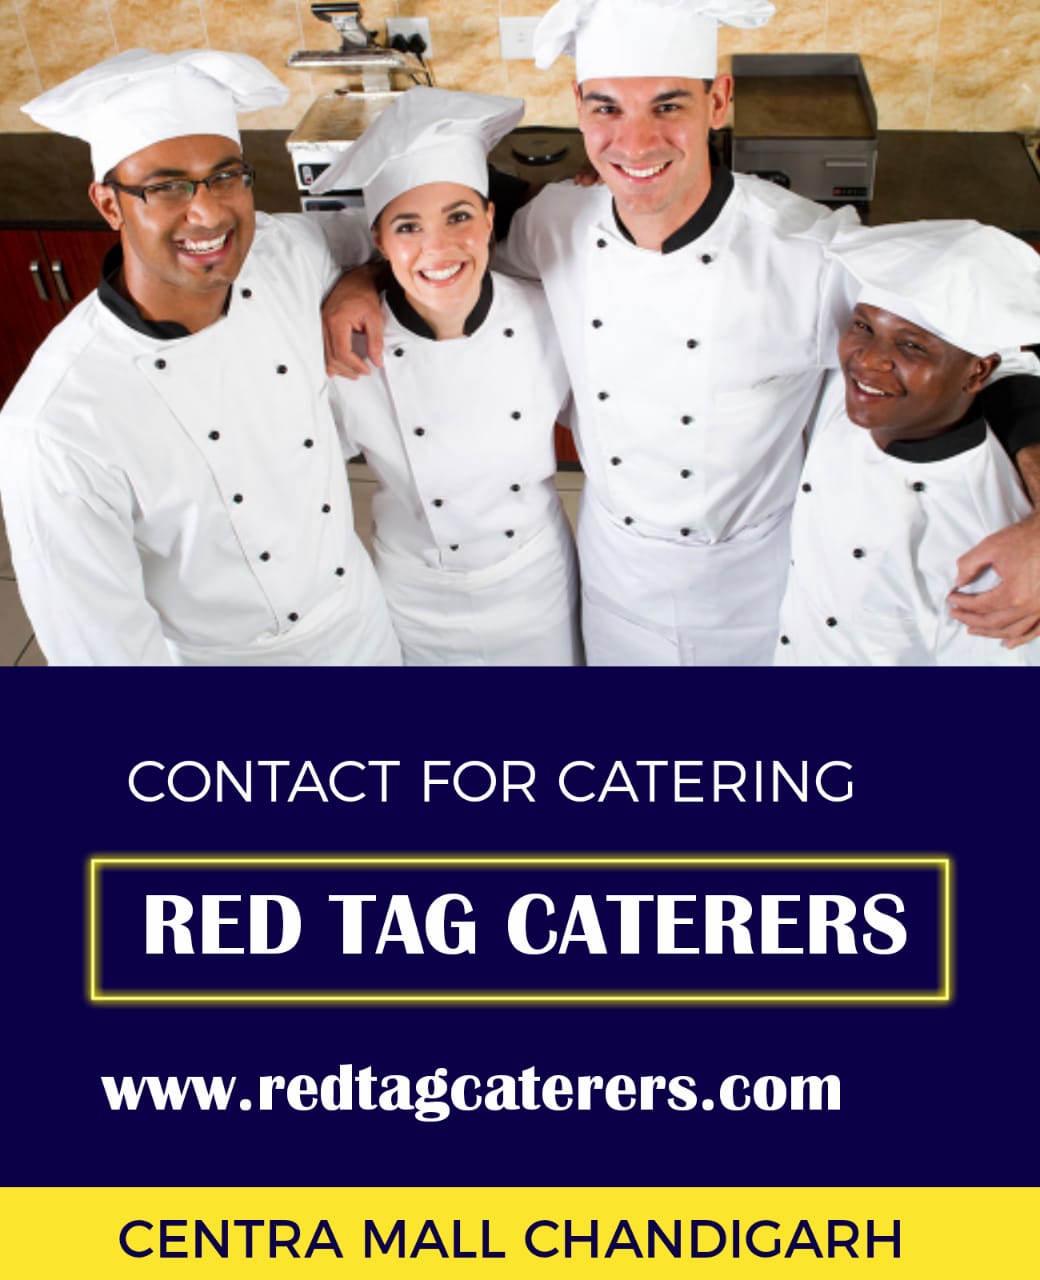 Red tag best wedding catering in Chandigarh | Red Tag Caterers | best wedding catering in Chandigarh, professional wedding catering in Chandigarh,expert wedding catering in Chandigarh, vegetarian wedding catering in Chandigarh, best wedding catering organization in - GL46296